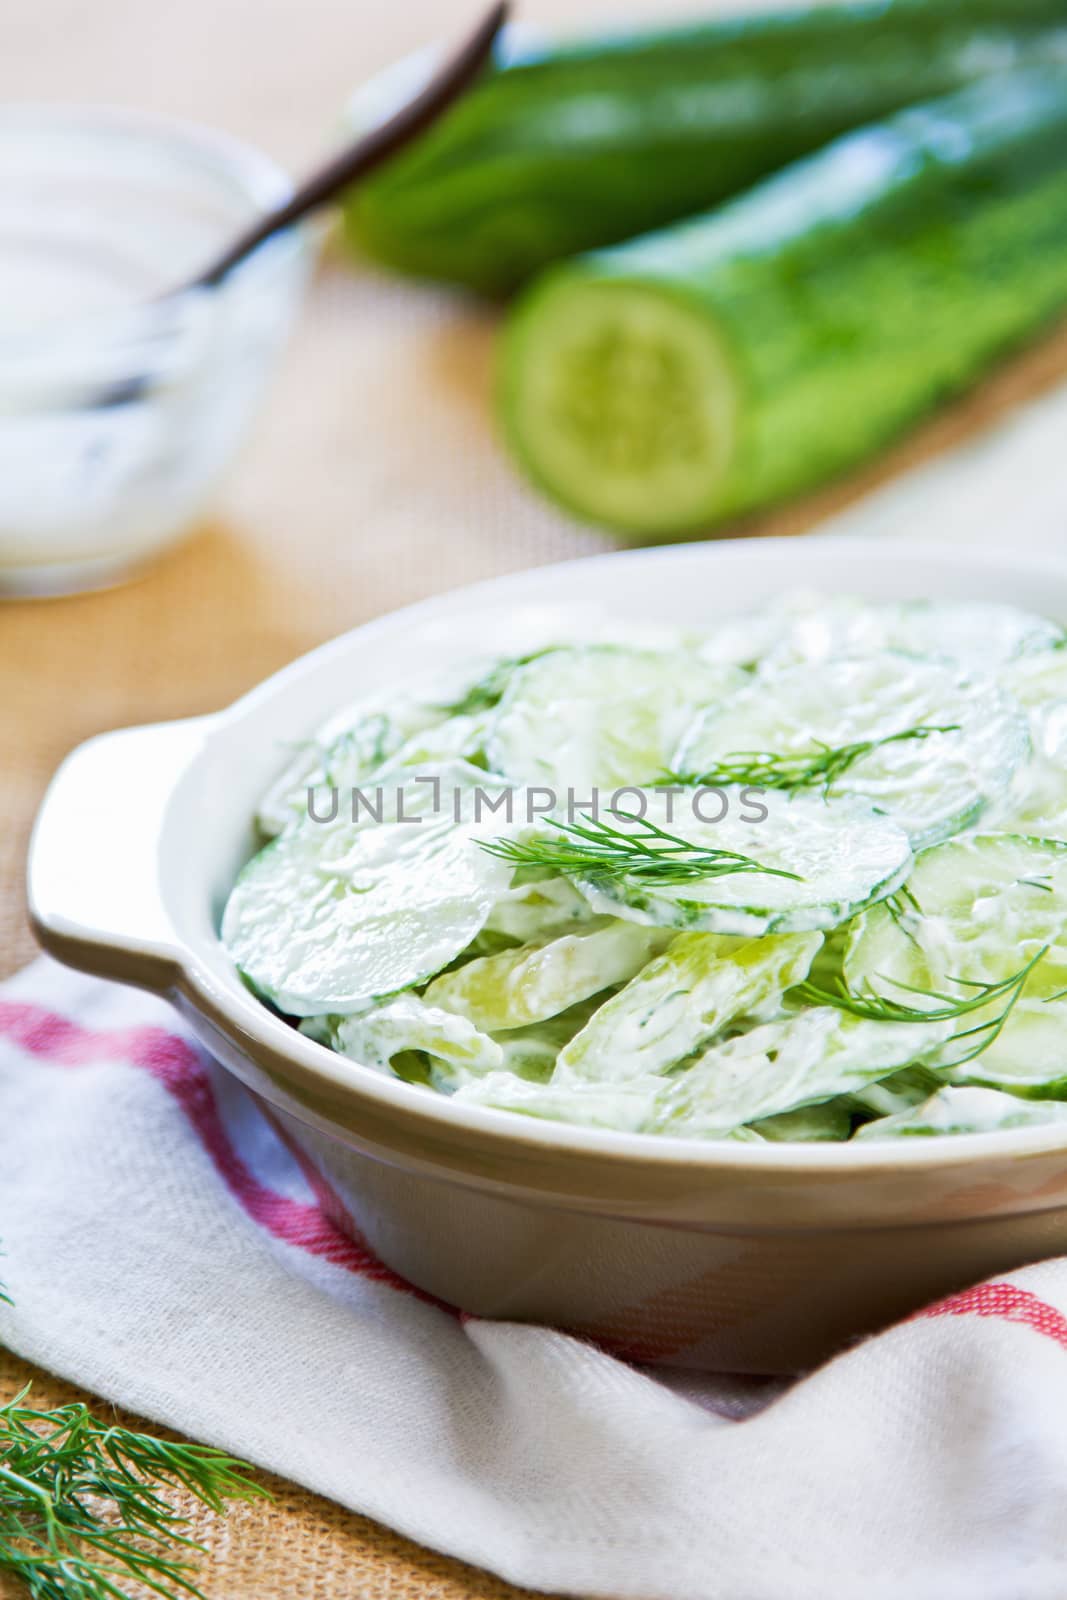 Cucumber with Celery and Dill salad by vanillaechoes